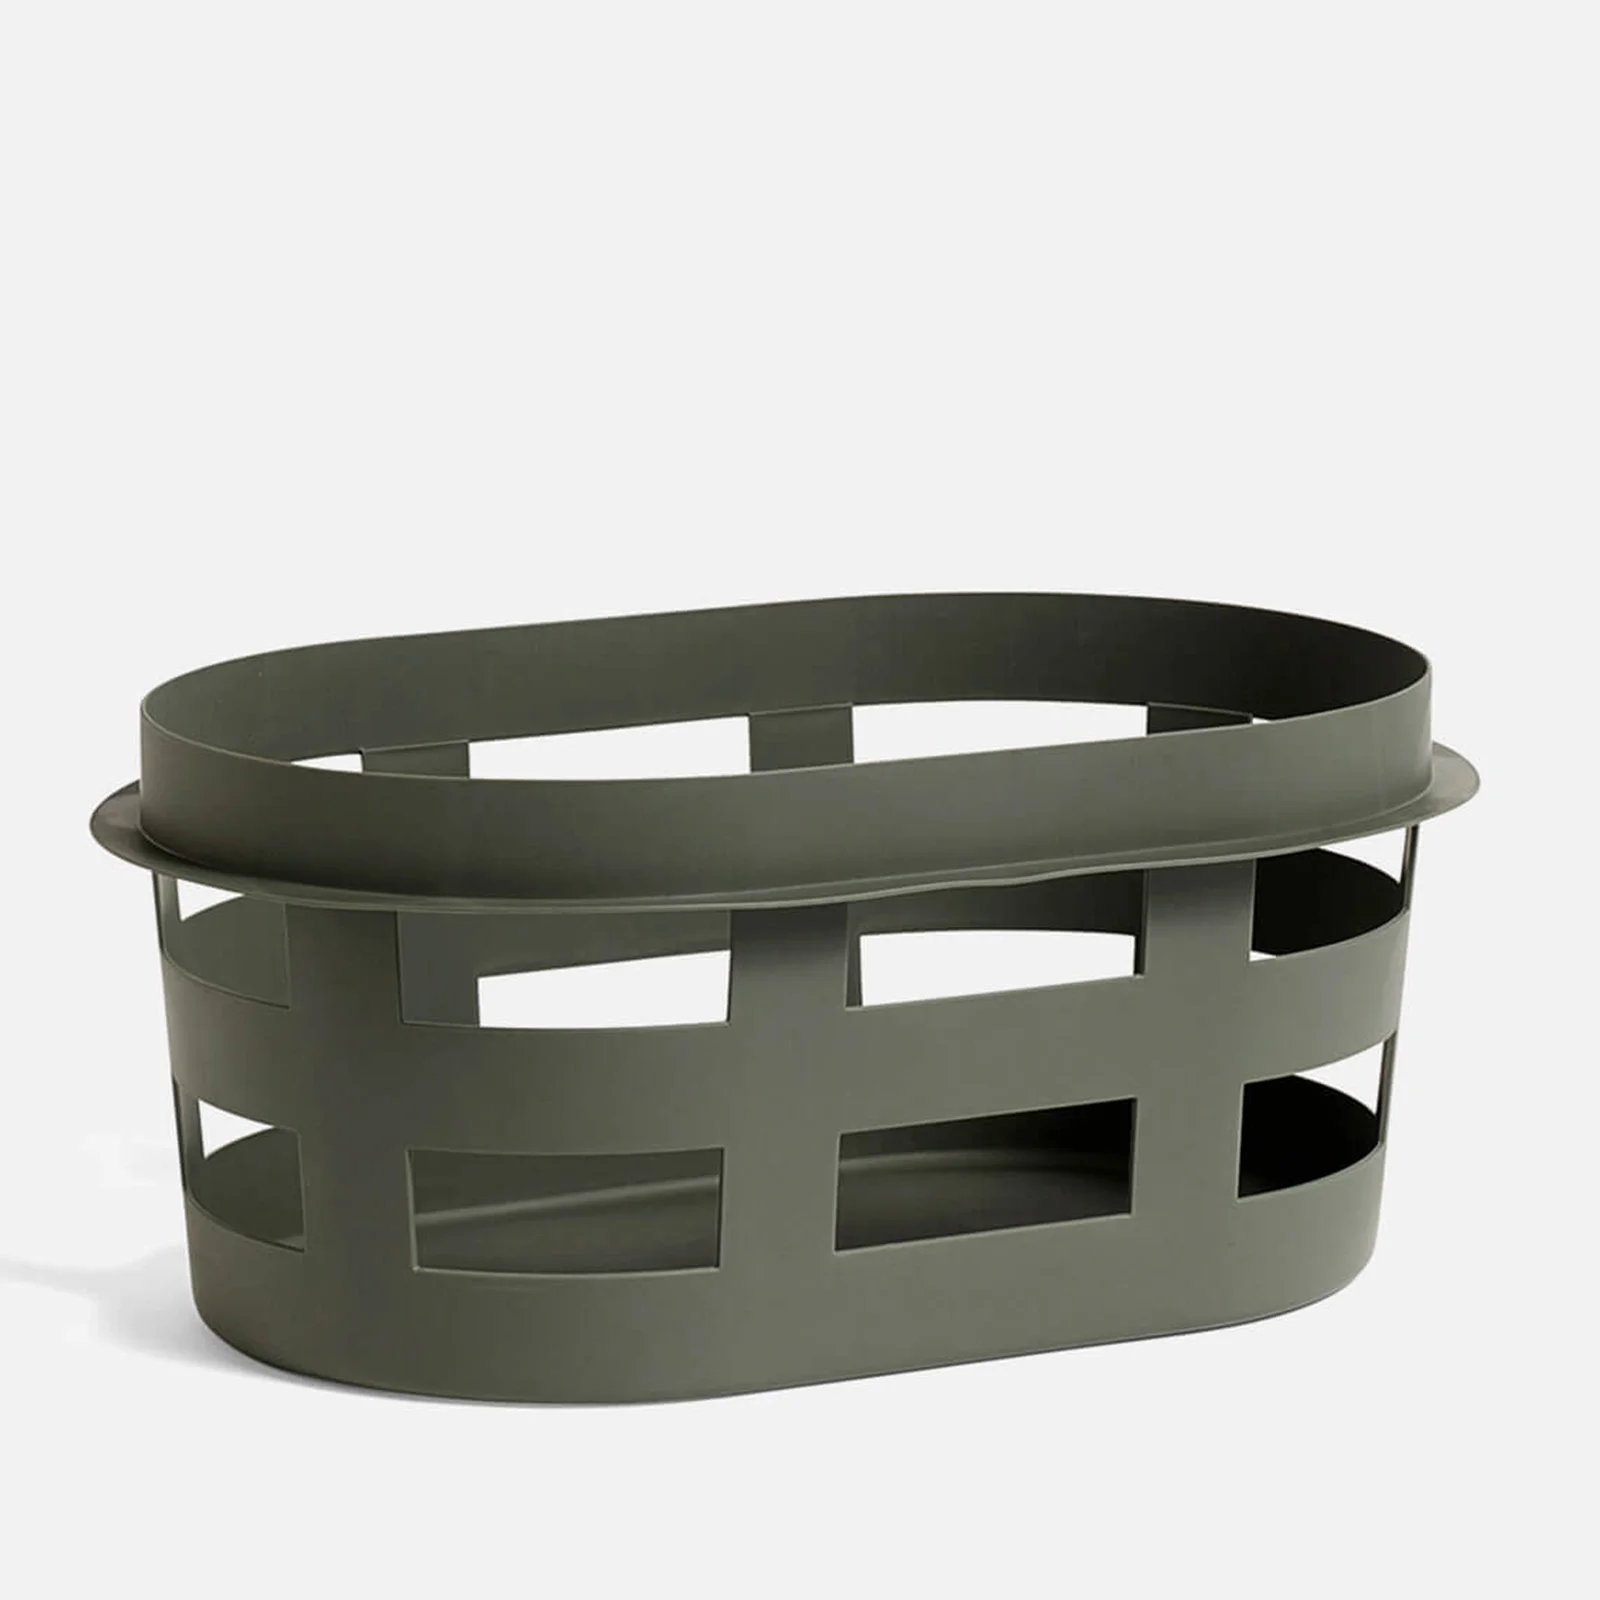 HAY Laundry Basket - Army - Small Image 1